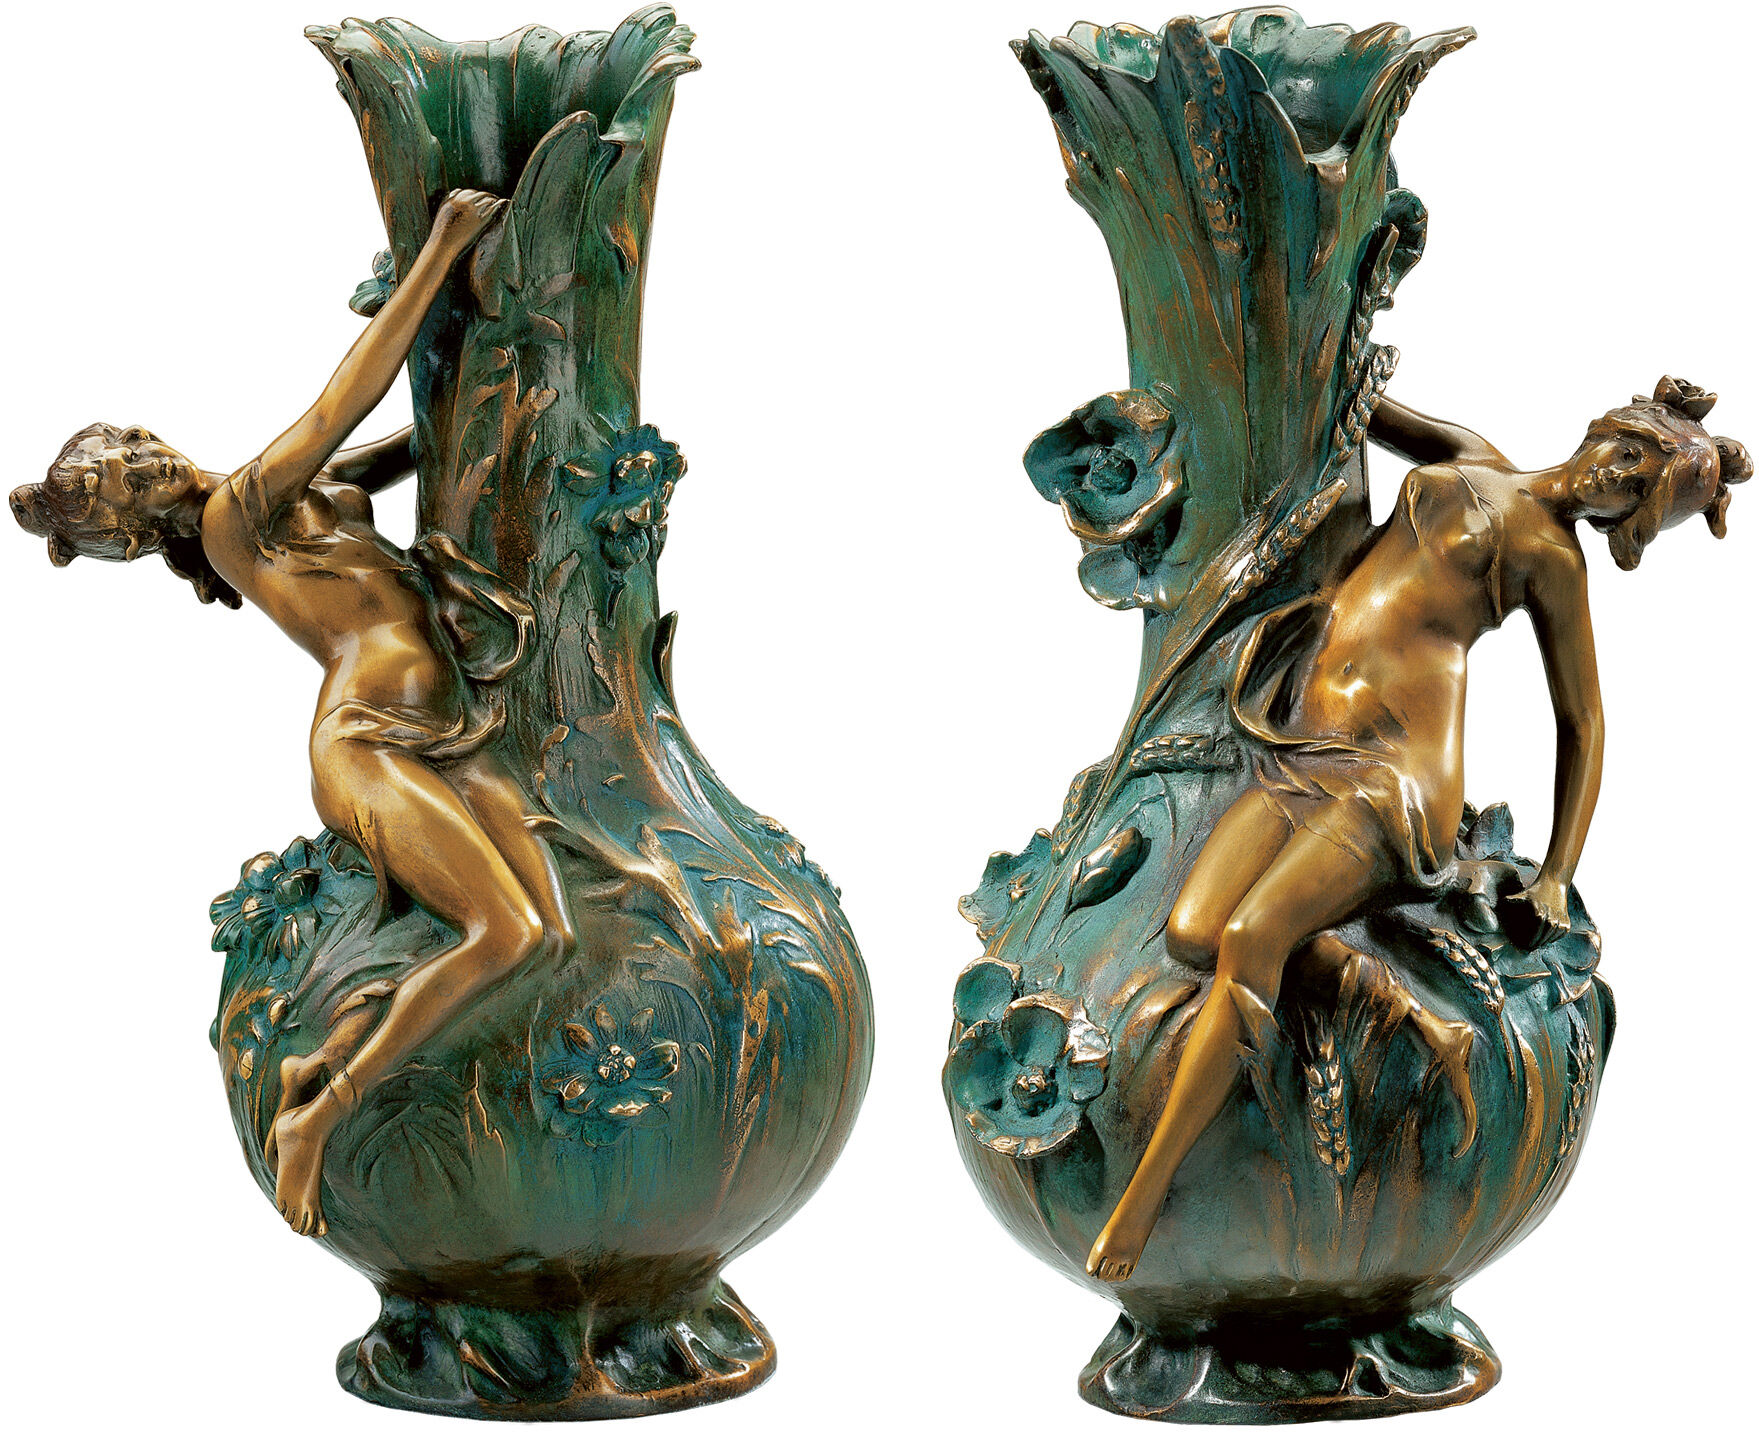 Set of 2 vases "Marguerites" and "Coquelicot", bronze version (antique green) by Louis Auguste Moreau